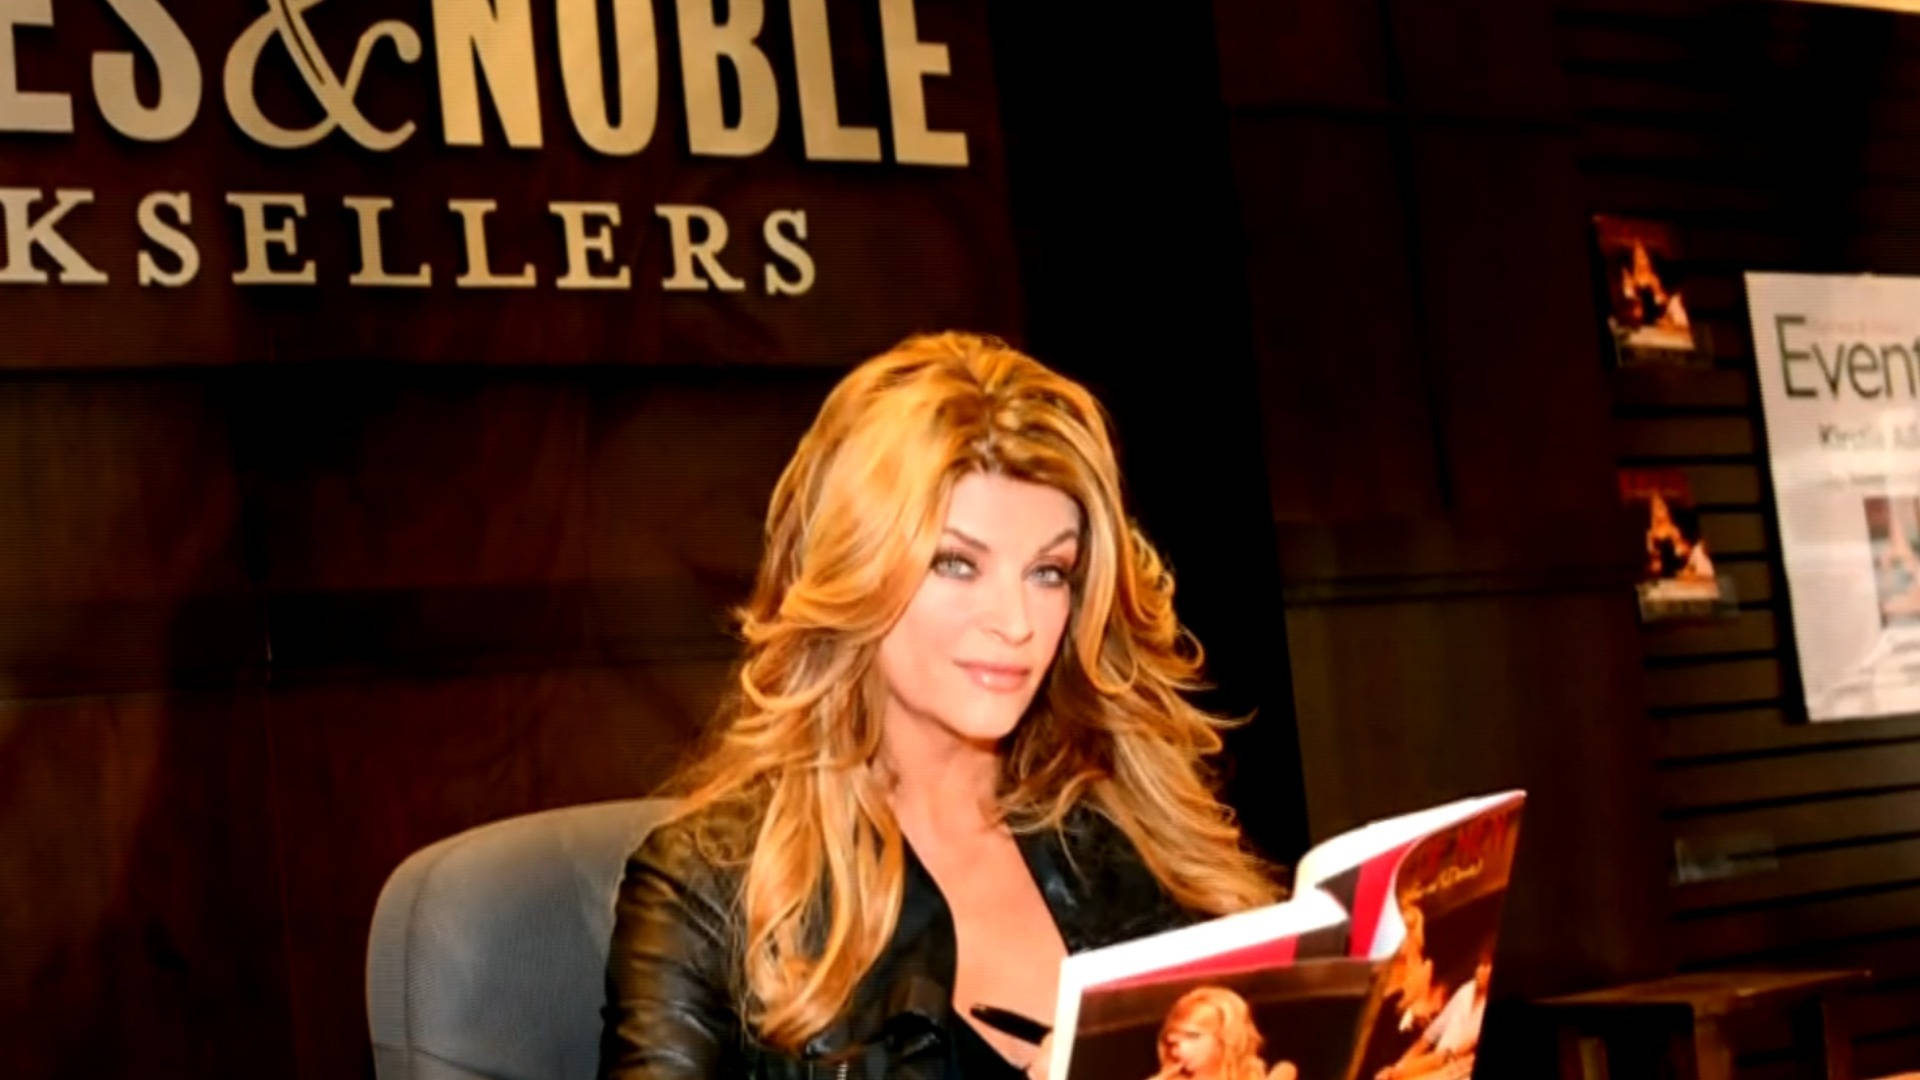 Hollywood Actress Kirstie Alley Promoting Her Book Wallpaper